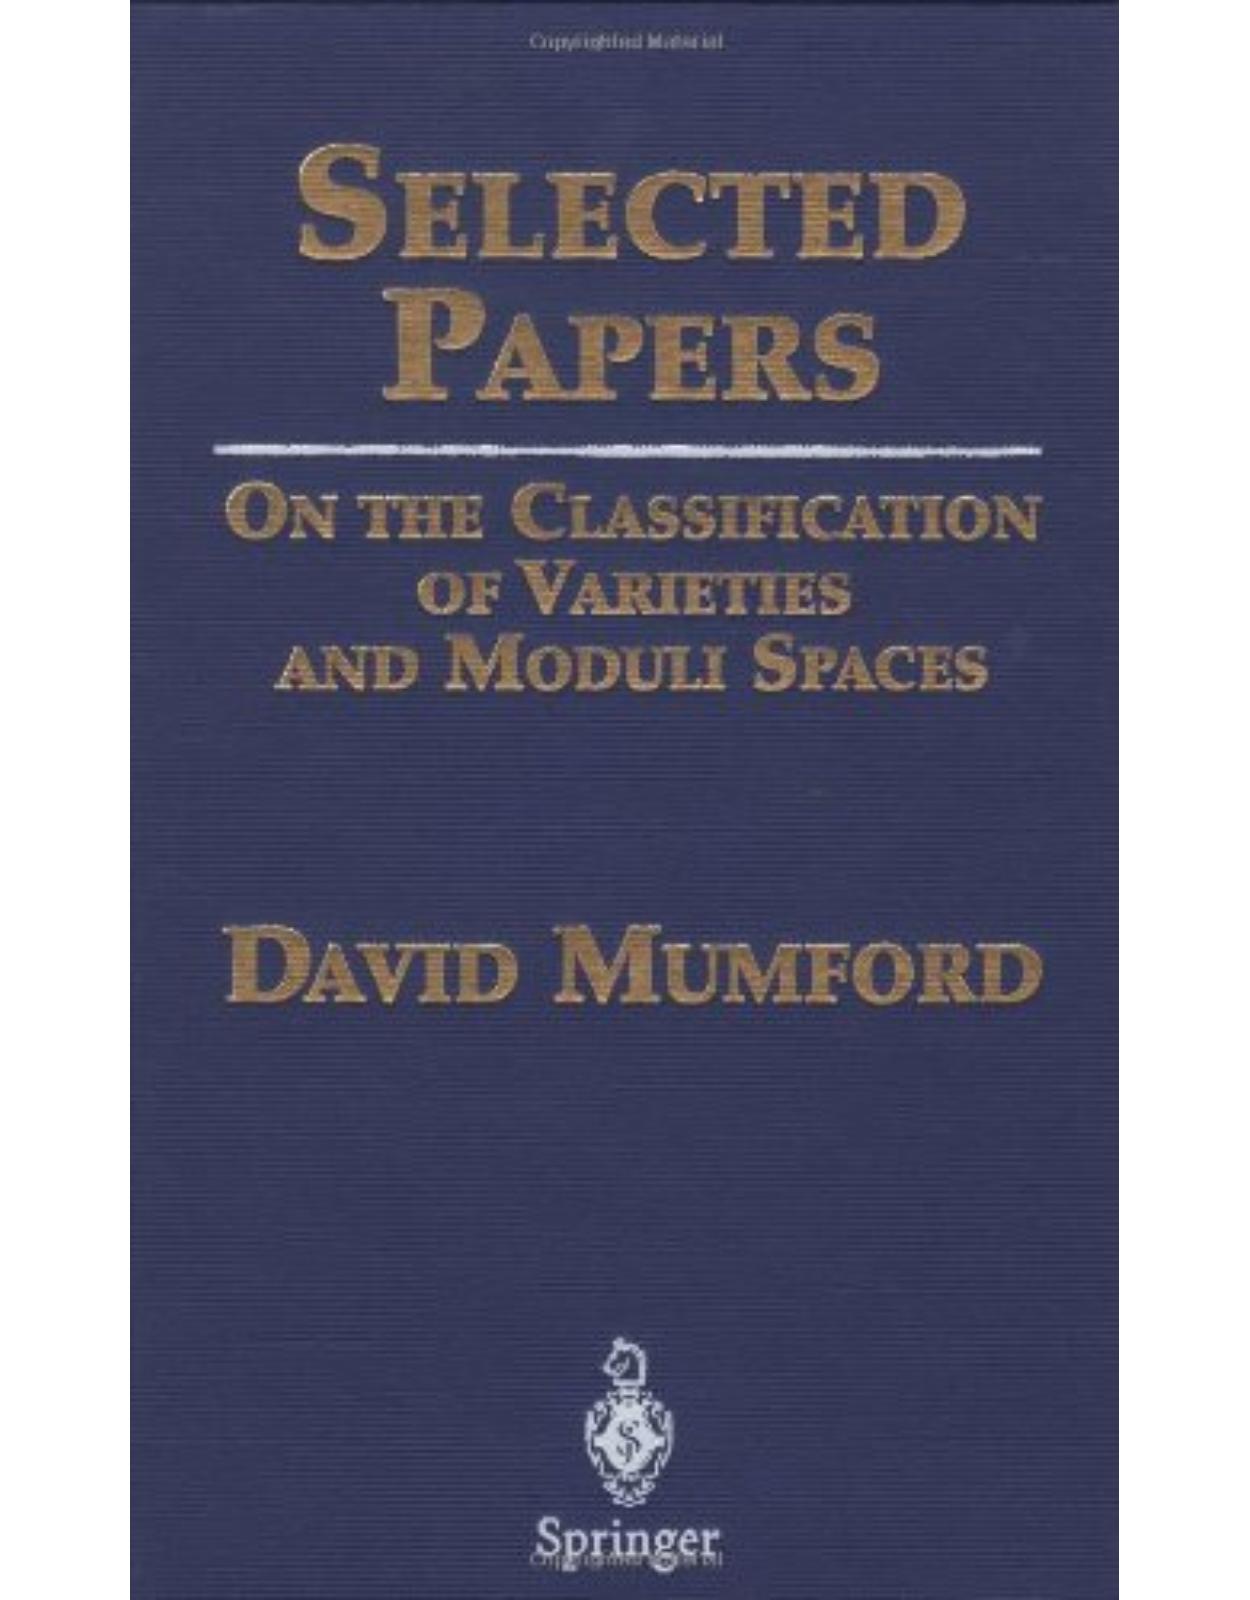 Selected Papers: On the Classification of Varieties and Moduli Spaces